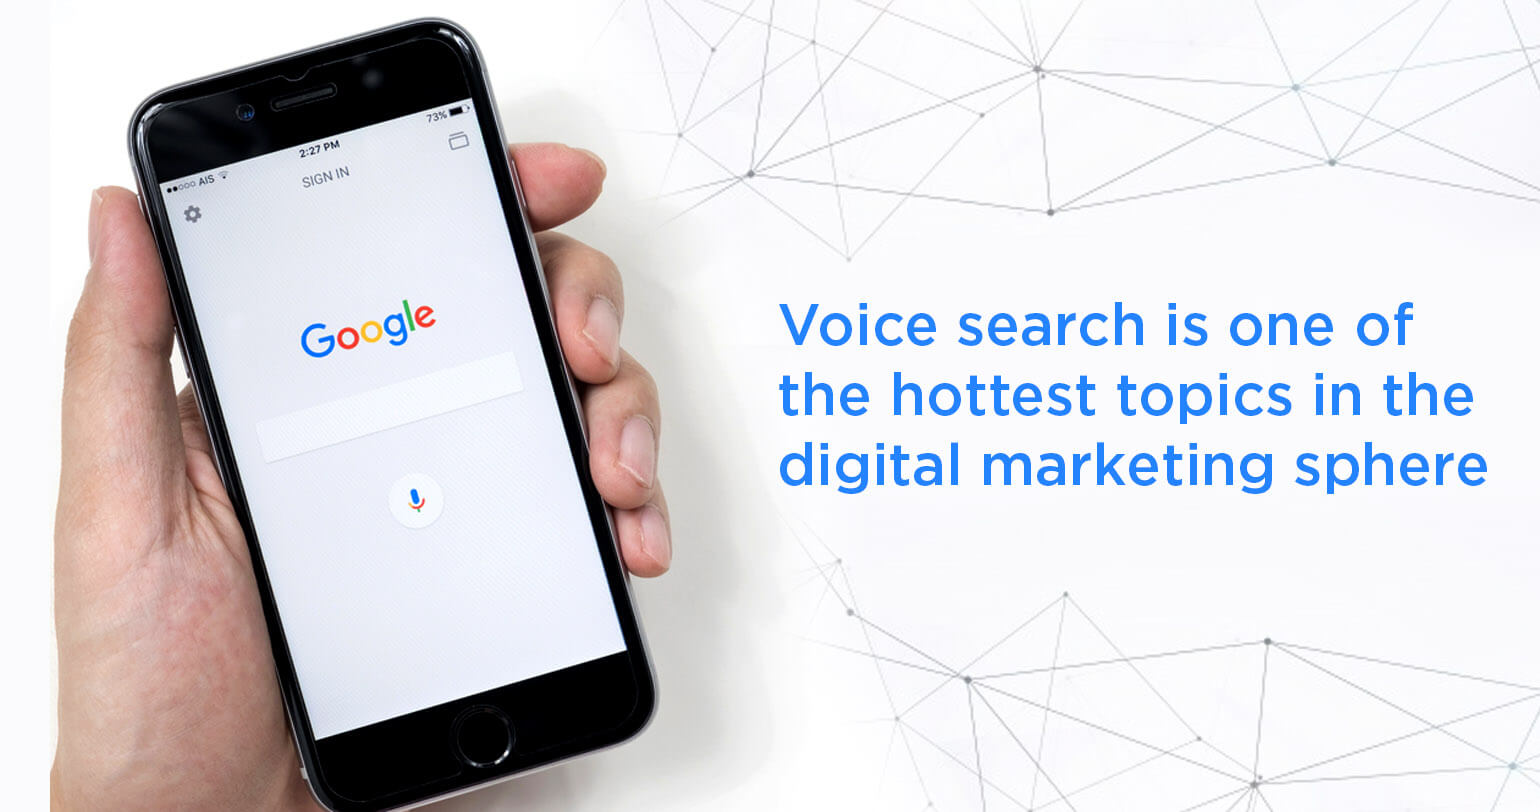 5-Essential-Things-You-Should-Know-about-Voice-Search-in-2019